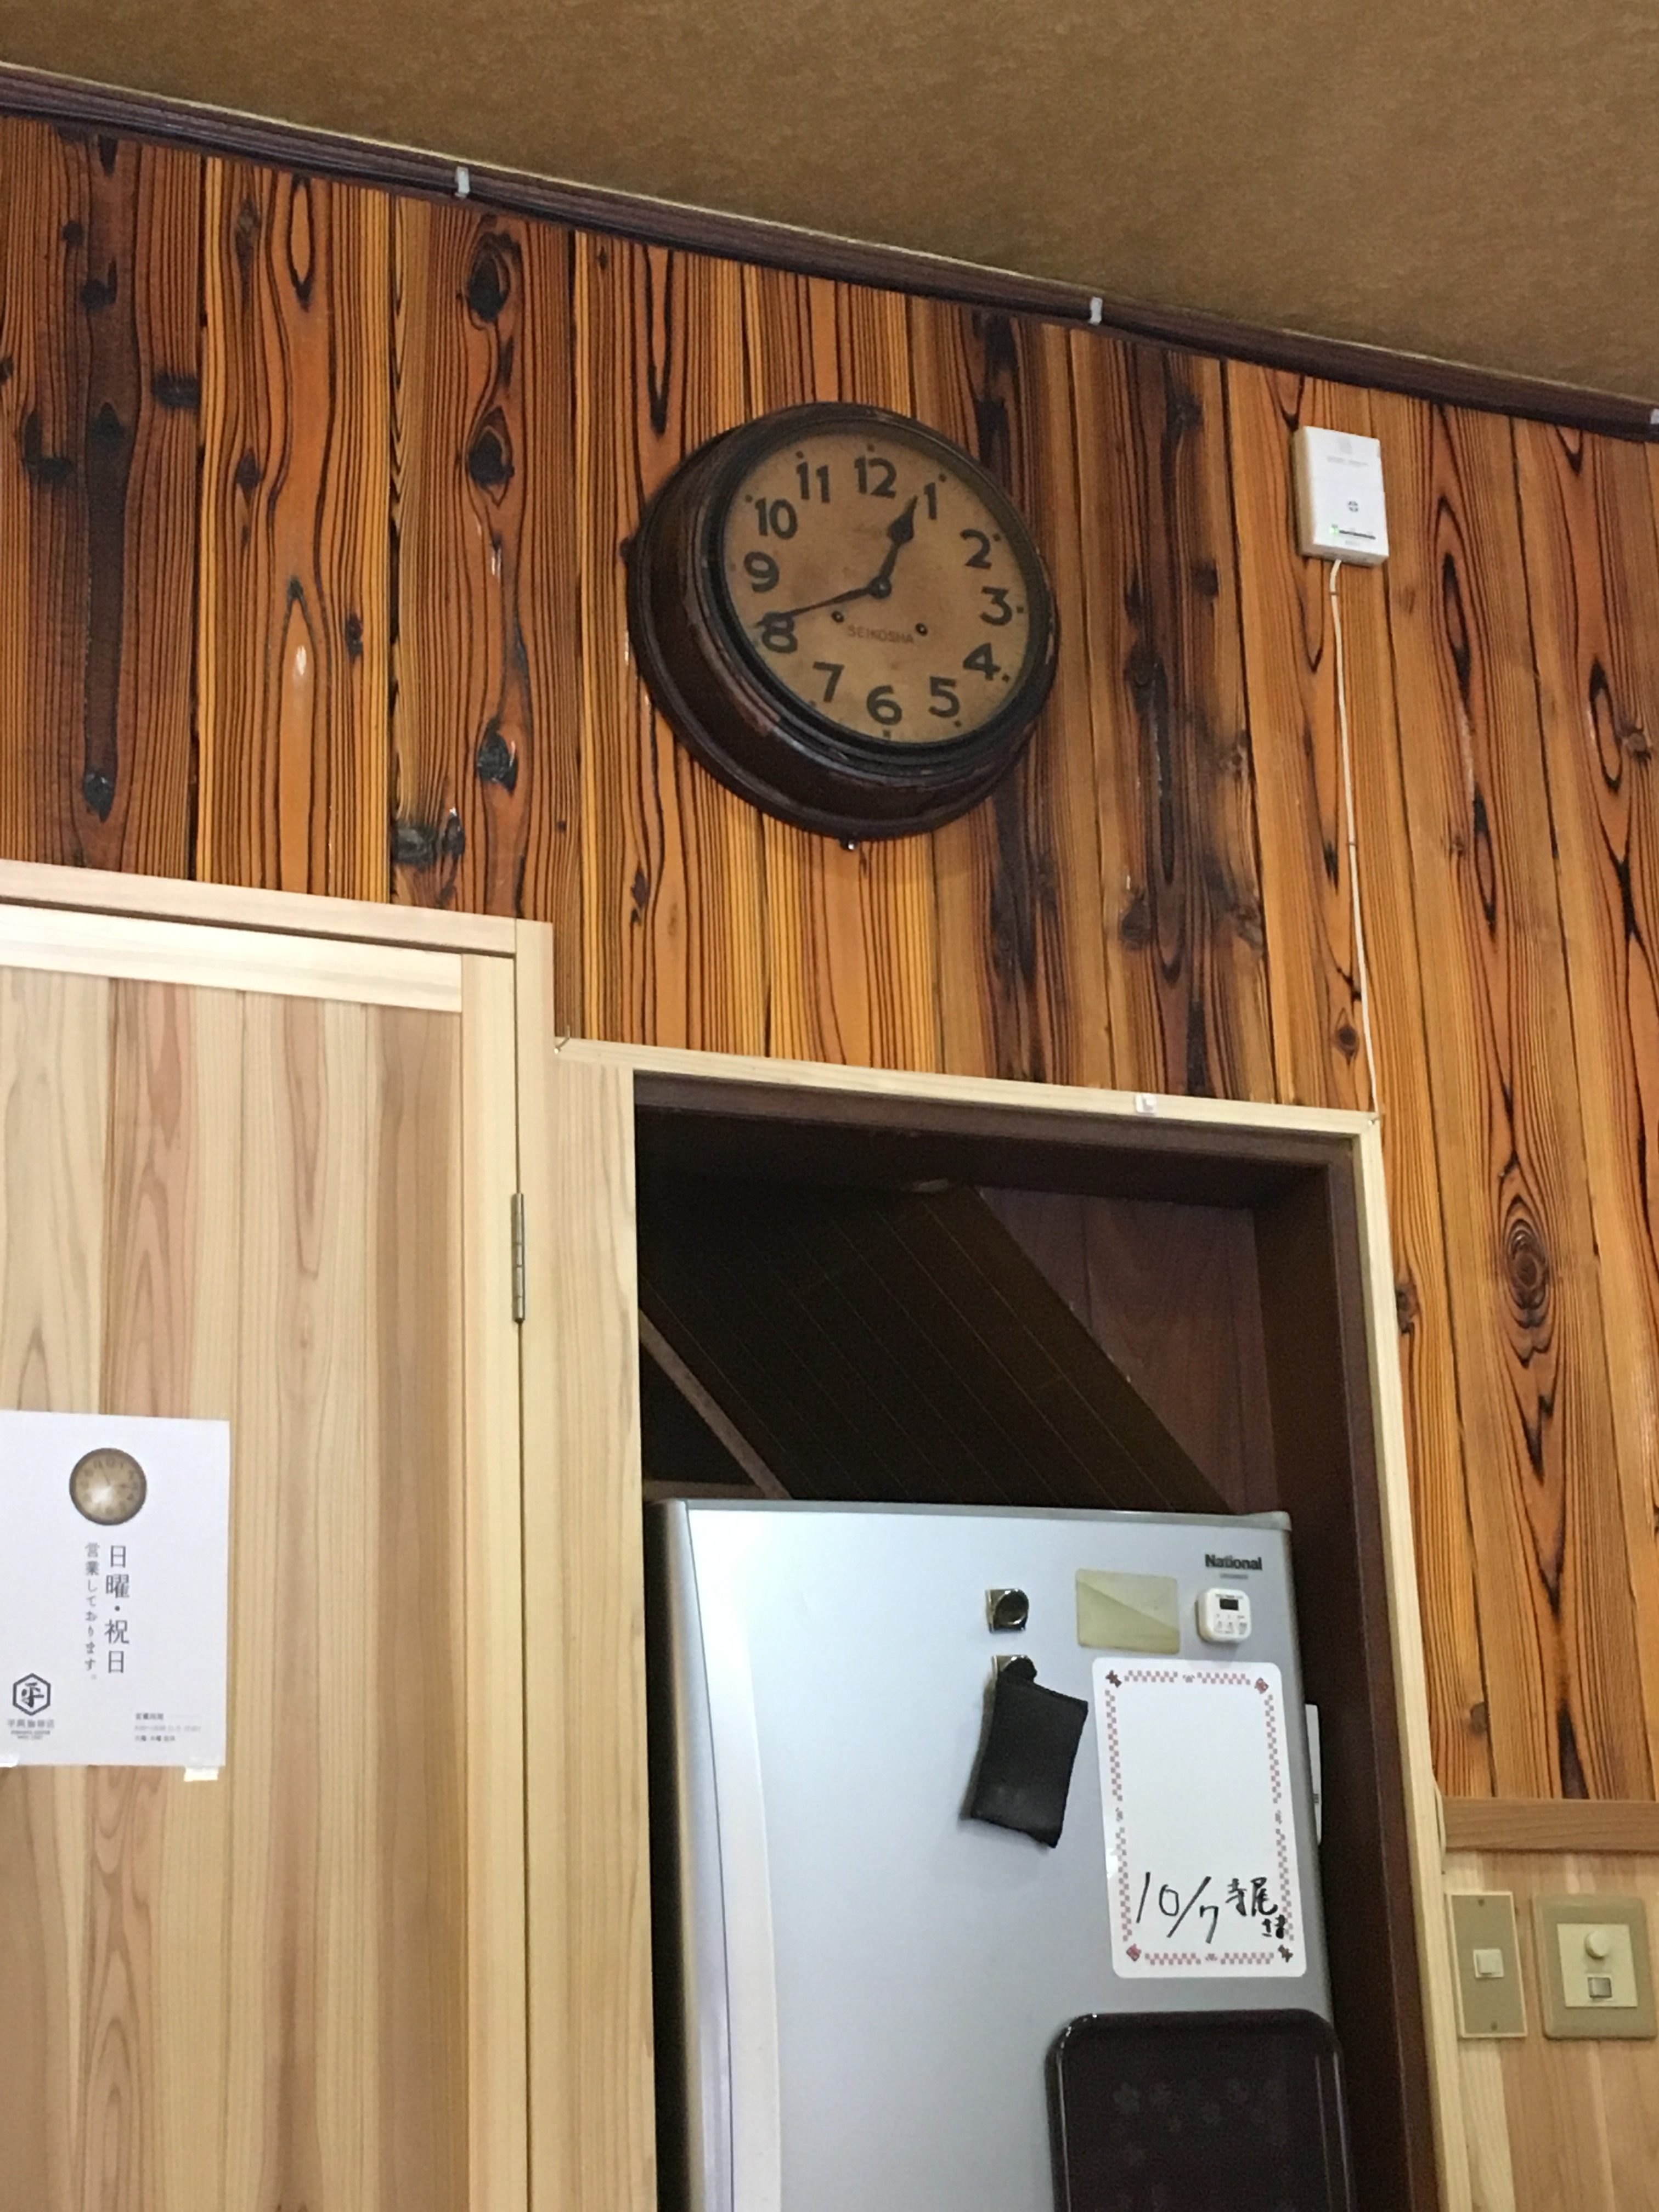 old clock against wood paneling above a refrigerator 